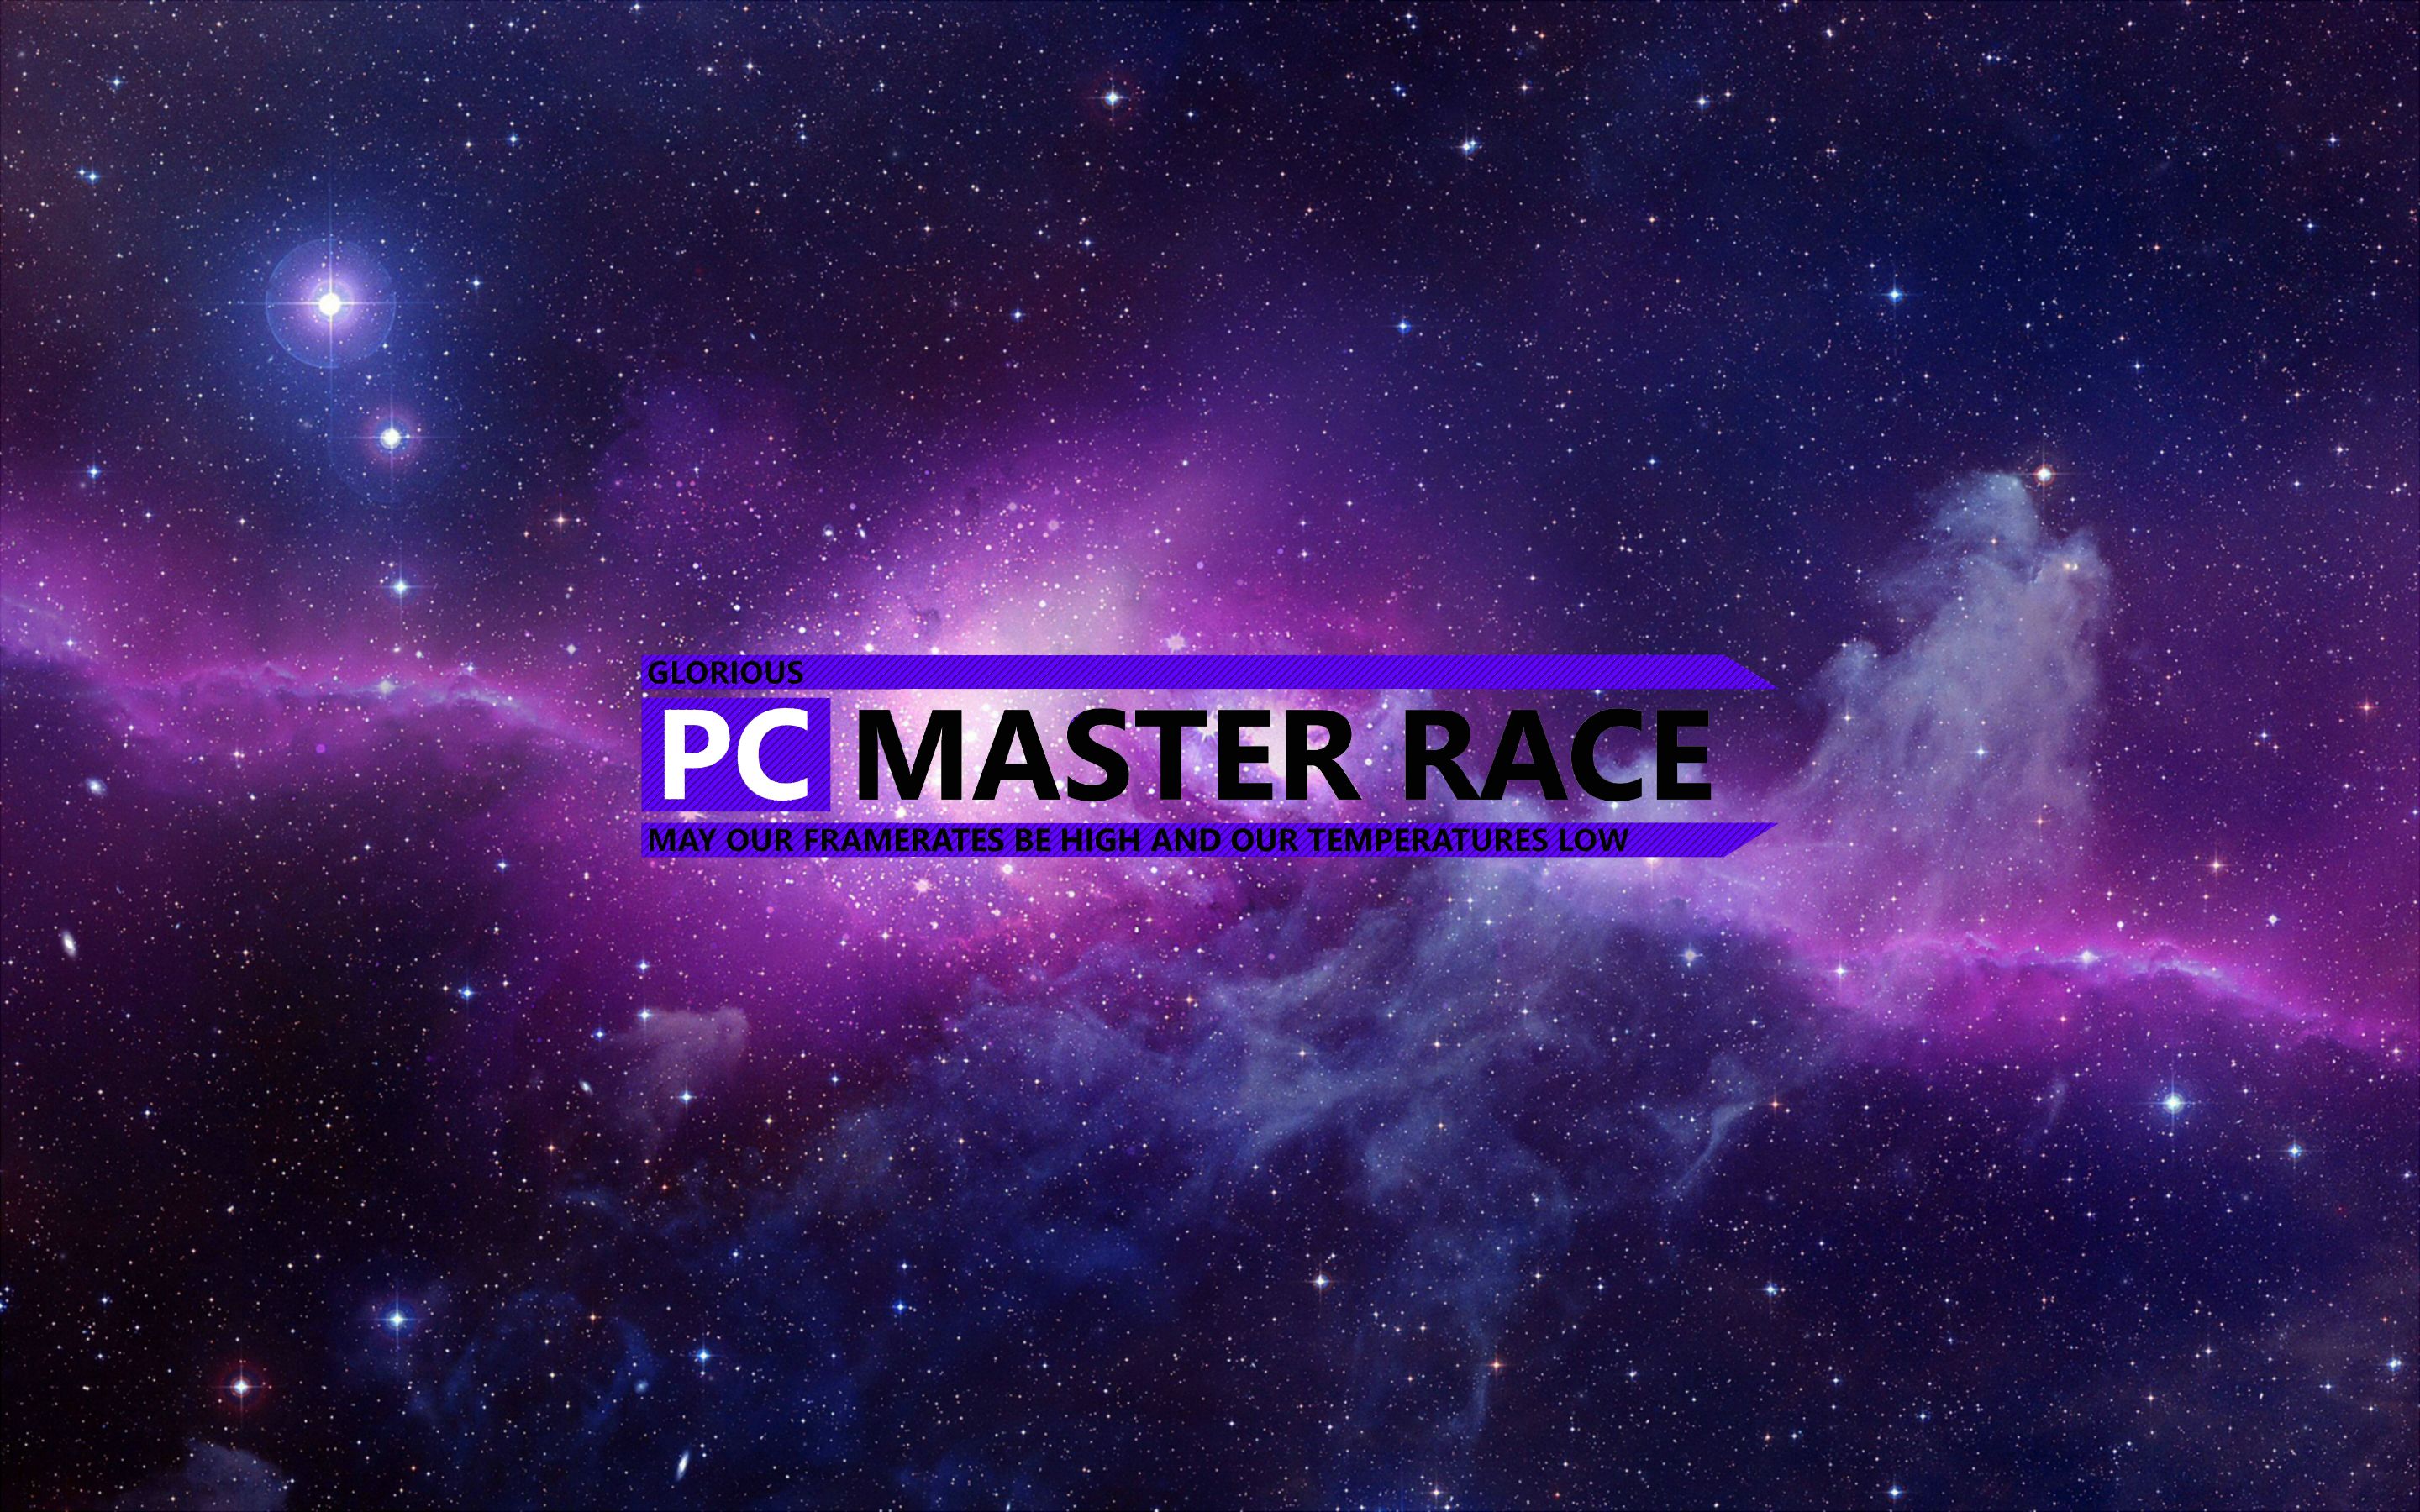 I Modified Existing Pcmr Wallpaper To Make My Own Pcmasterrace